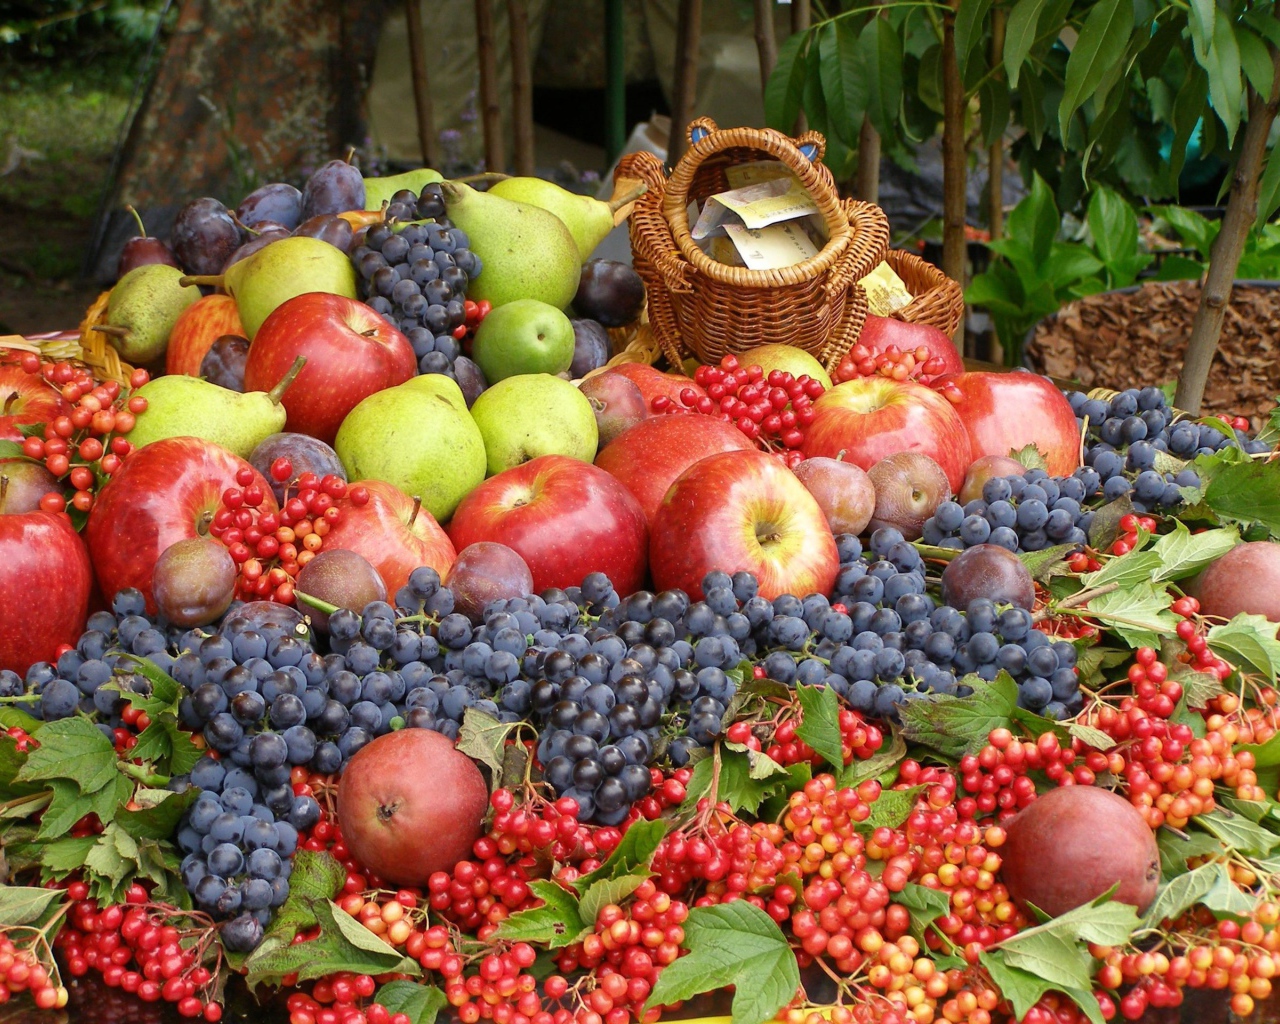 A mountain of berries and fruits